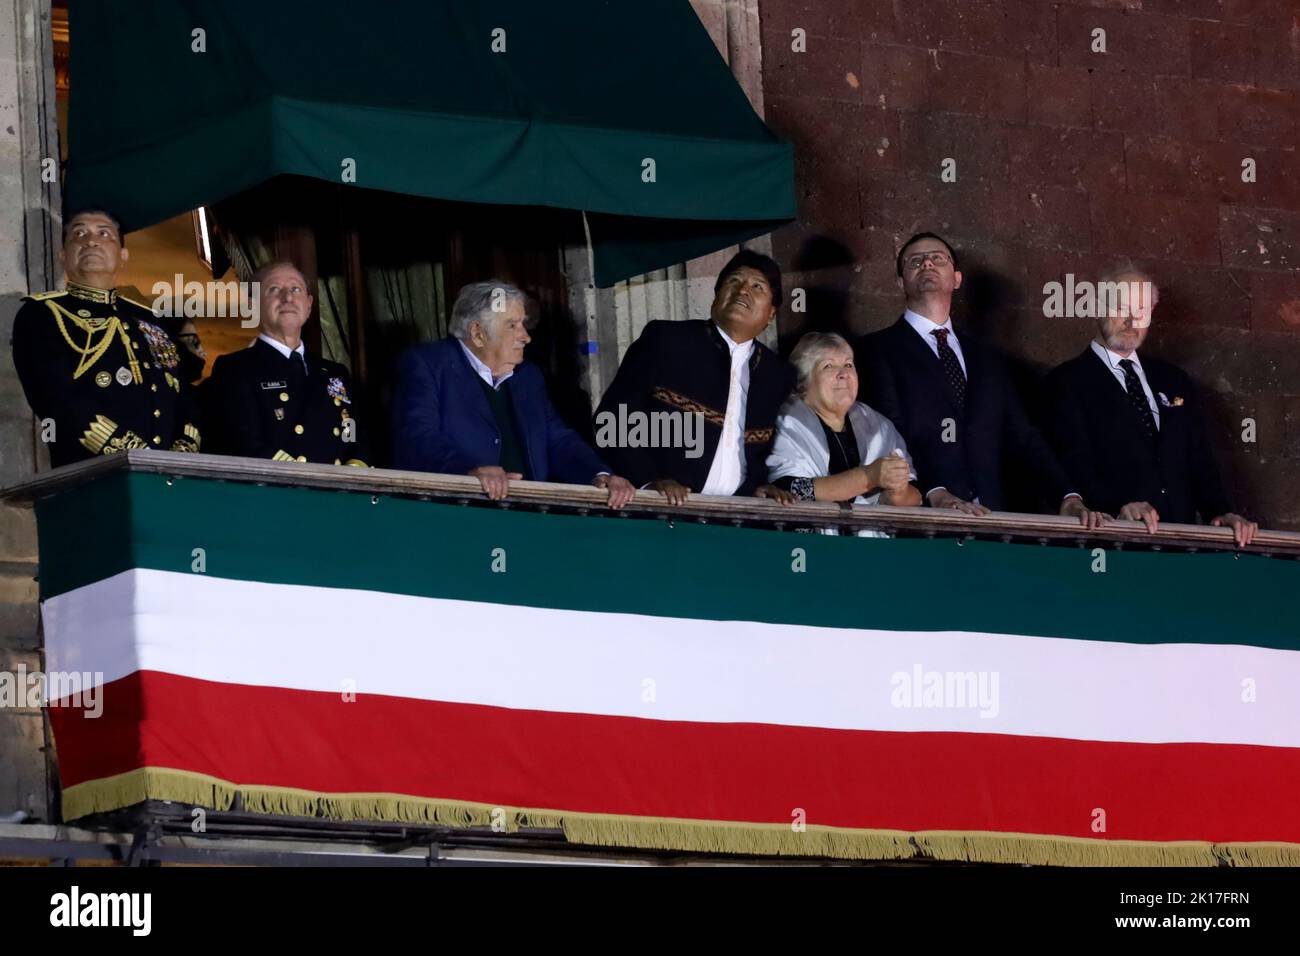 Mexico City, Mexico. 15th Sep, 2022. The Secretaries of National Defense, Luis Crescencio Sandoval; of Navy, Rafael Ojeda; the former president of Uruguay, José MÃºjica; the former president of Bolivia, Evo Morales; Aleida Guevara March, daughter of Ernesto ''Che'' Guevara; Gabriel Shipton and John Shipton, brother and father of Julian Assange, during the ceremony on the 212th anniversary of the Mexico's Cry of Independence at the National Palace. on September 15, 2022 in Mexico City, Mexico. Credit: ZUMA Press, Inc./Alamy Live News Stock Photo